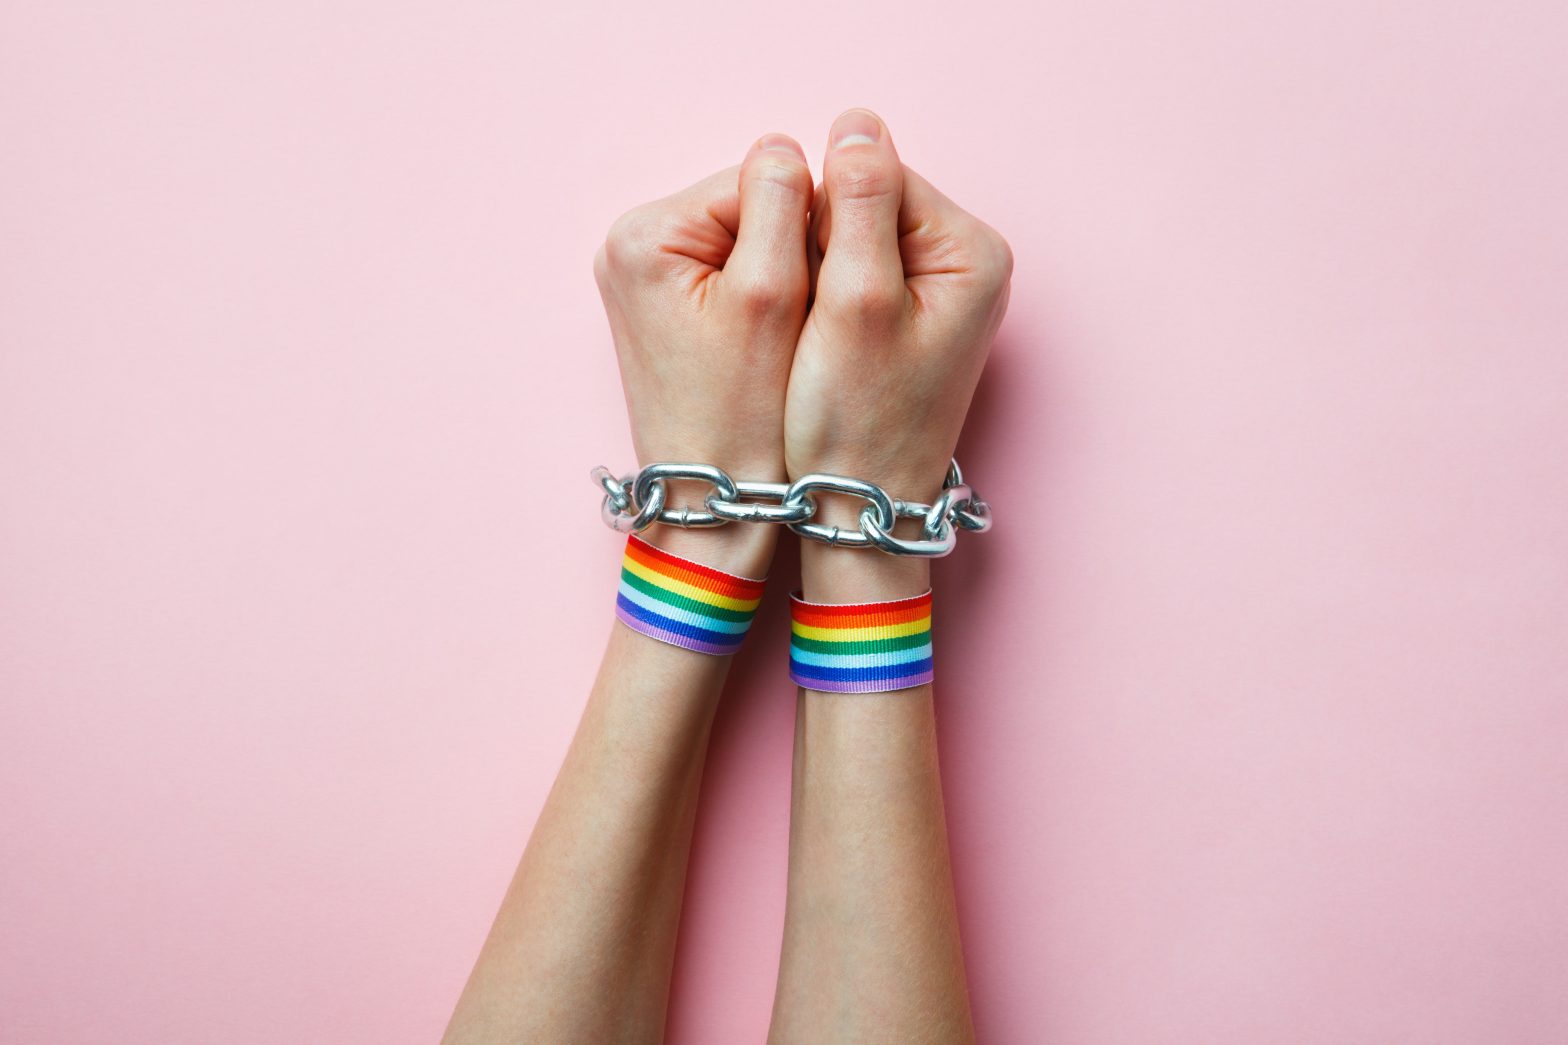 Hands with rainbow ribbon in chains, symbolizing incarcerated LGBTQ people. Washington State Department of Corrections - transgender prisoner